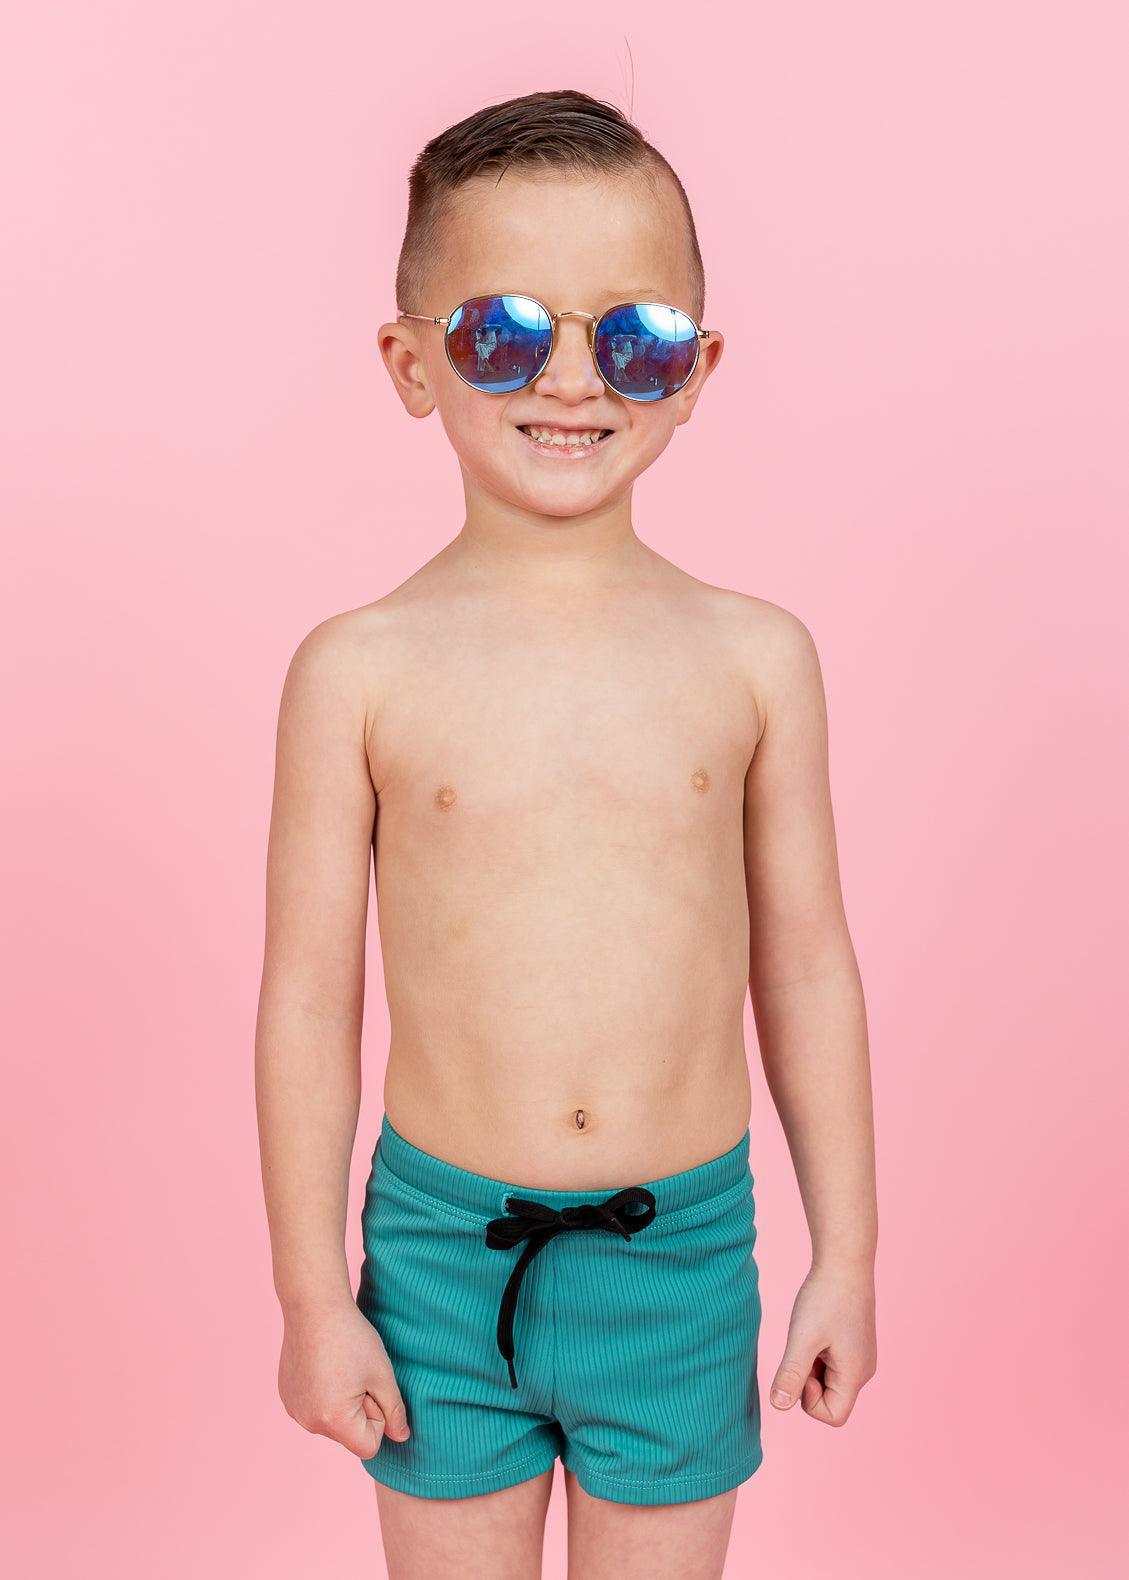 Boys Swimsuit - Shorts  - Ribbed Teal Waves